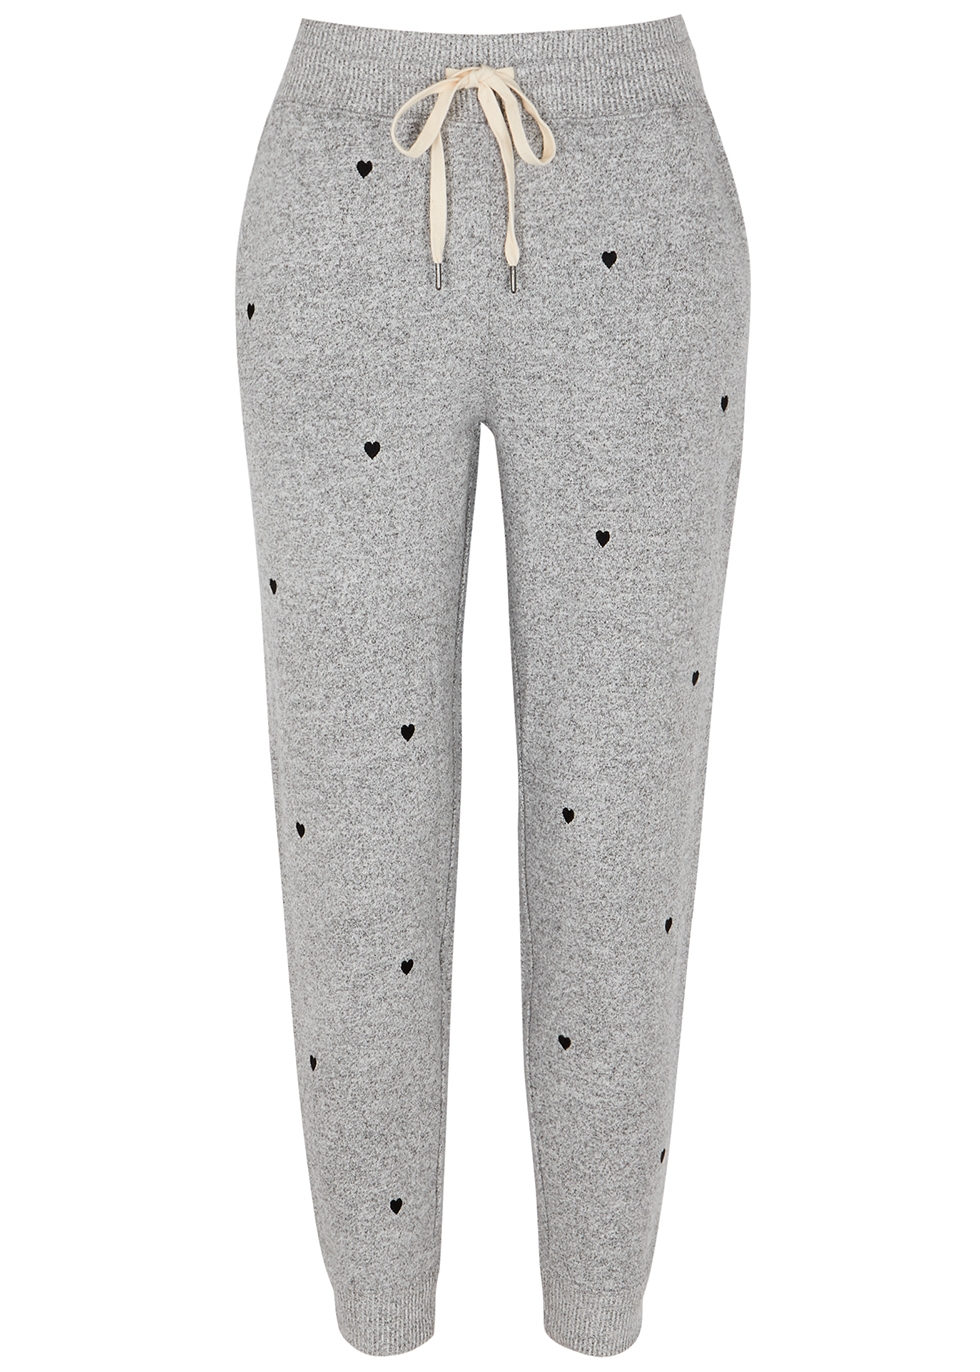 Oakland embroidered stretch-knit sweatpants